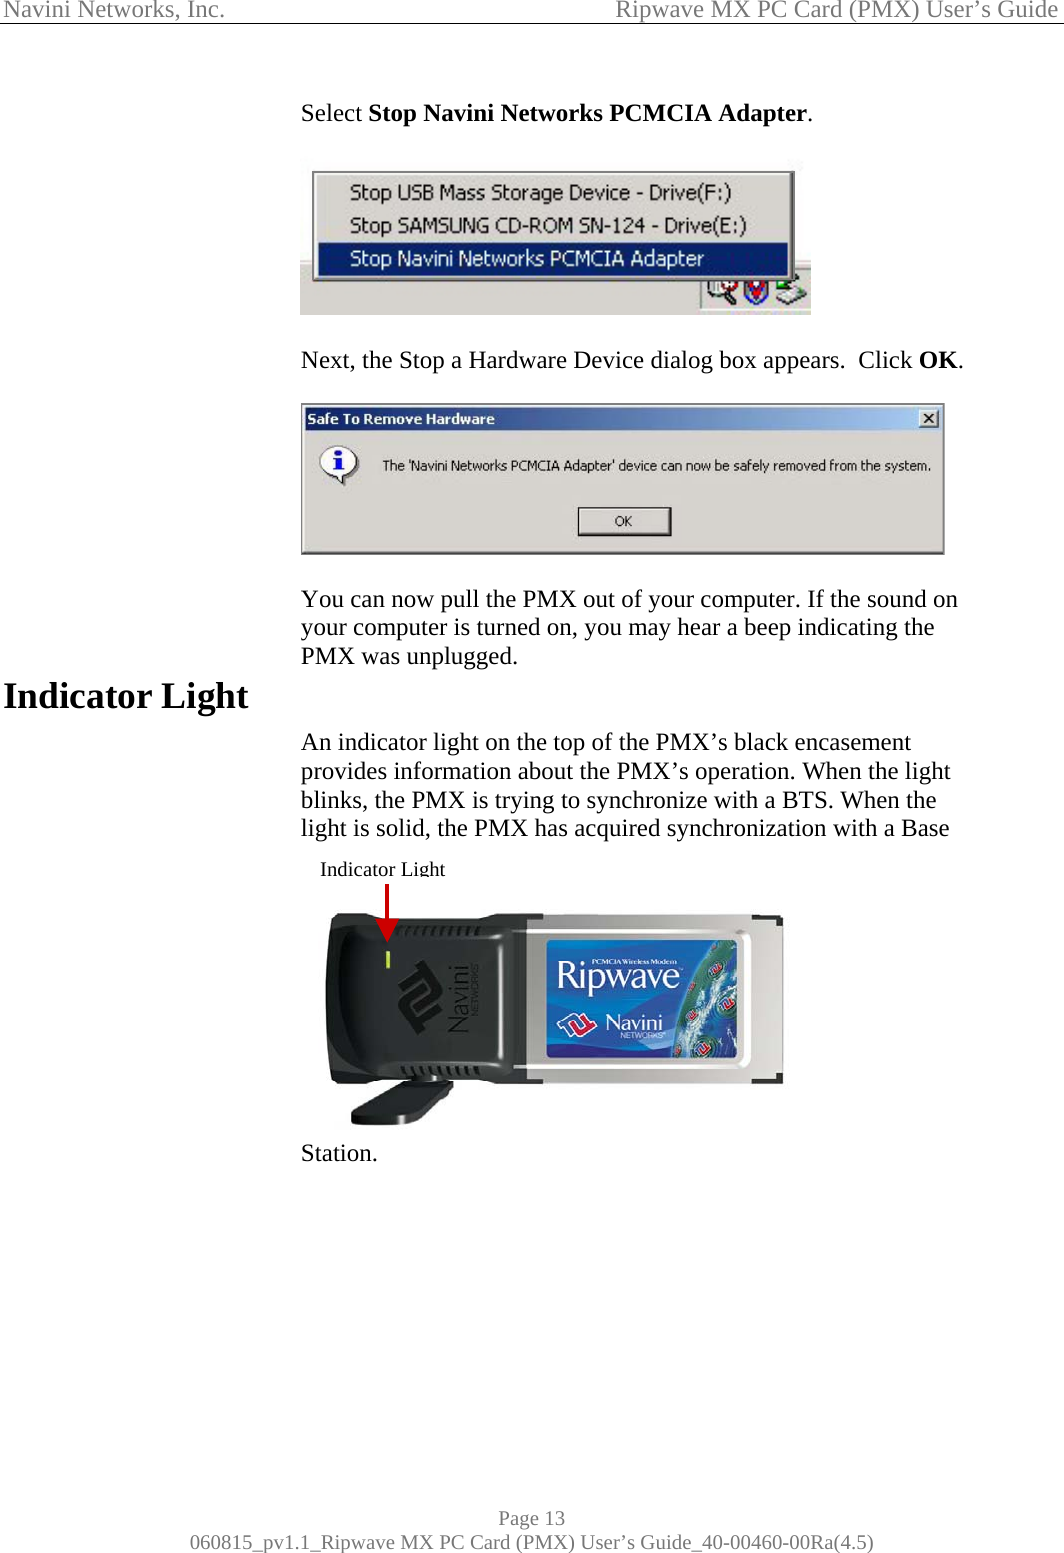 Navini Networks, Inc.                                           Ripwave MX PC Card (PMX) User’s Guide                     Indicator Light elect Stop Navini Networks PCMCIA Adapter.                        S   ext, the Stop a Hardware Device dialog box appears.  Click OK.  N   ou can now pull the PMX out of your computer. If the sound on n indicator light on the top of the PMX’s black encasement  ht  Yyour computer is turned on, you may hear a beep indicating the PMX was unplugged.    Aprovides information about the PMX’s operation. When the ligblinks, the PMX is trying to synchronize with a BTS. When the light is solid, the PMX has acquired synchronization with a BaseStation.    Indicator LightPage 13 060815_pv1.1_Ripwave MX PC Card (PMX) User’s Guide_40-00460-00Ra(4.5) 